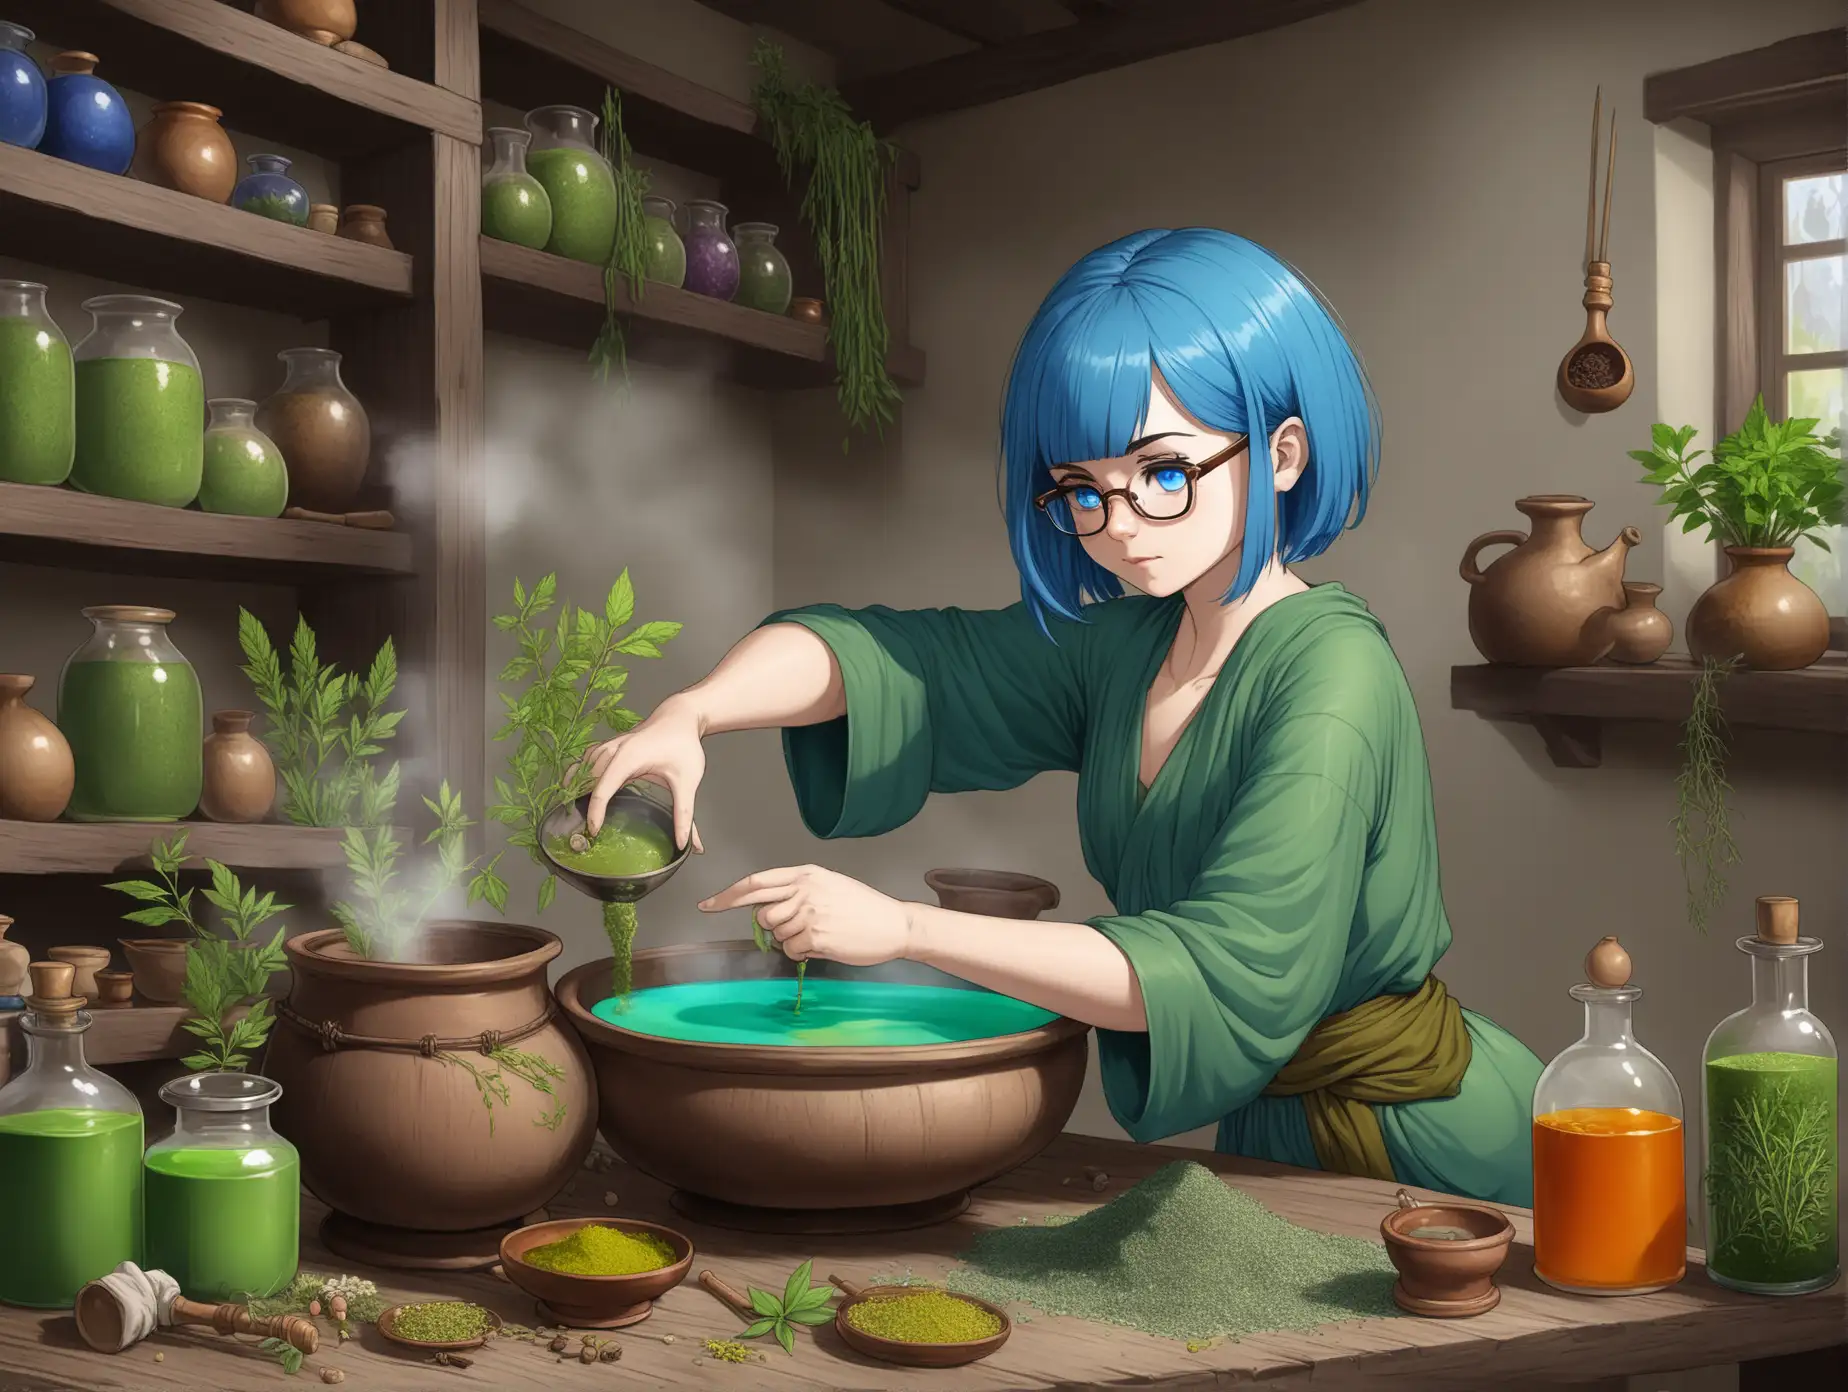 Herbalist-Witch-with-Blue-Hair-Preparing-Decoction